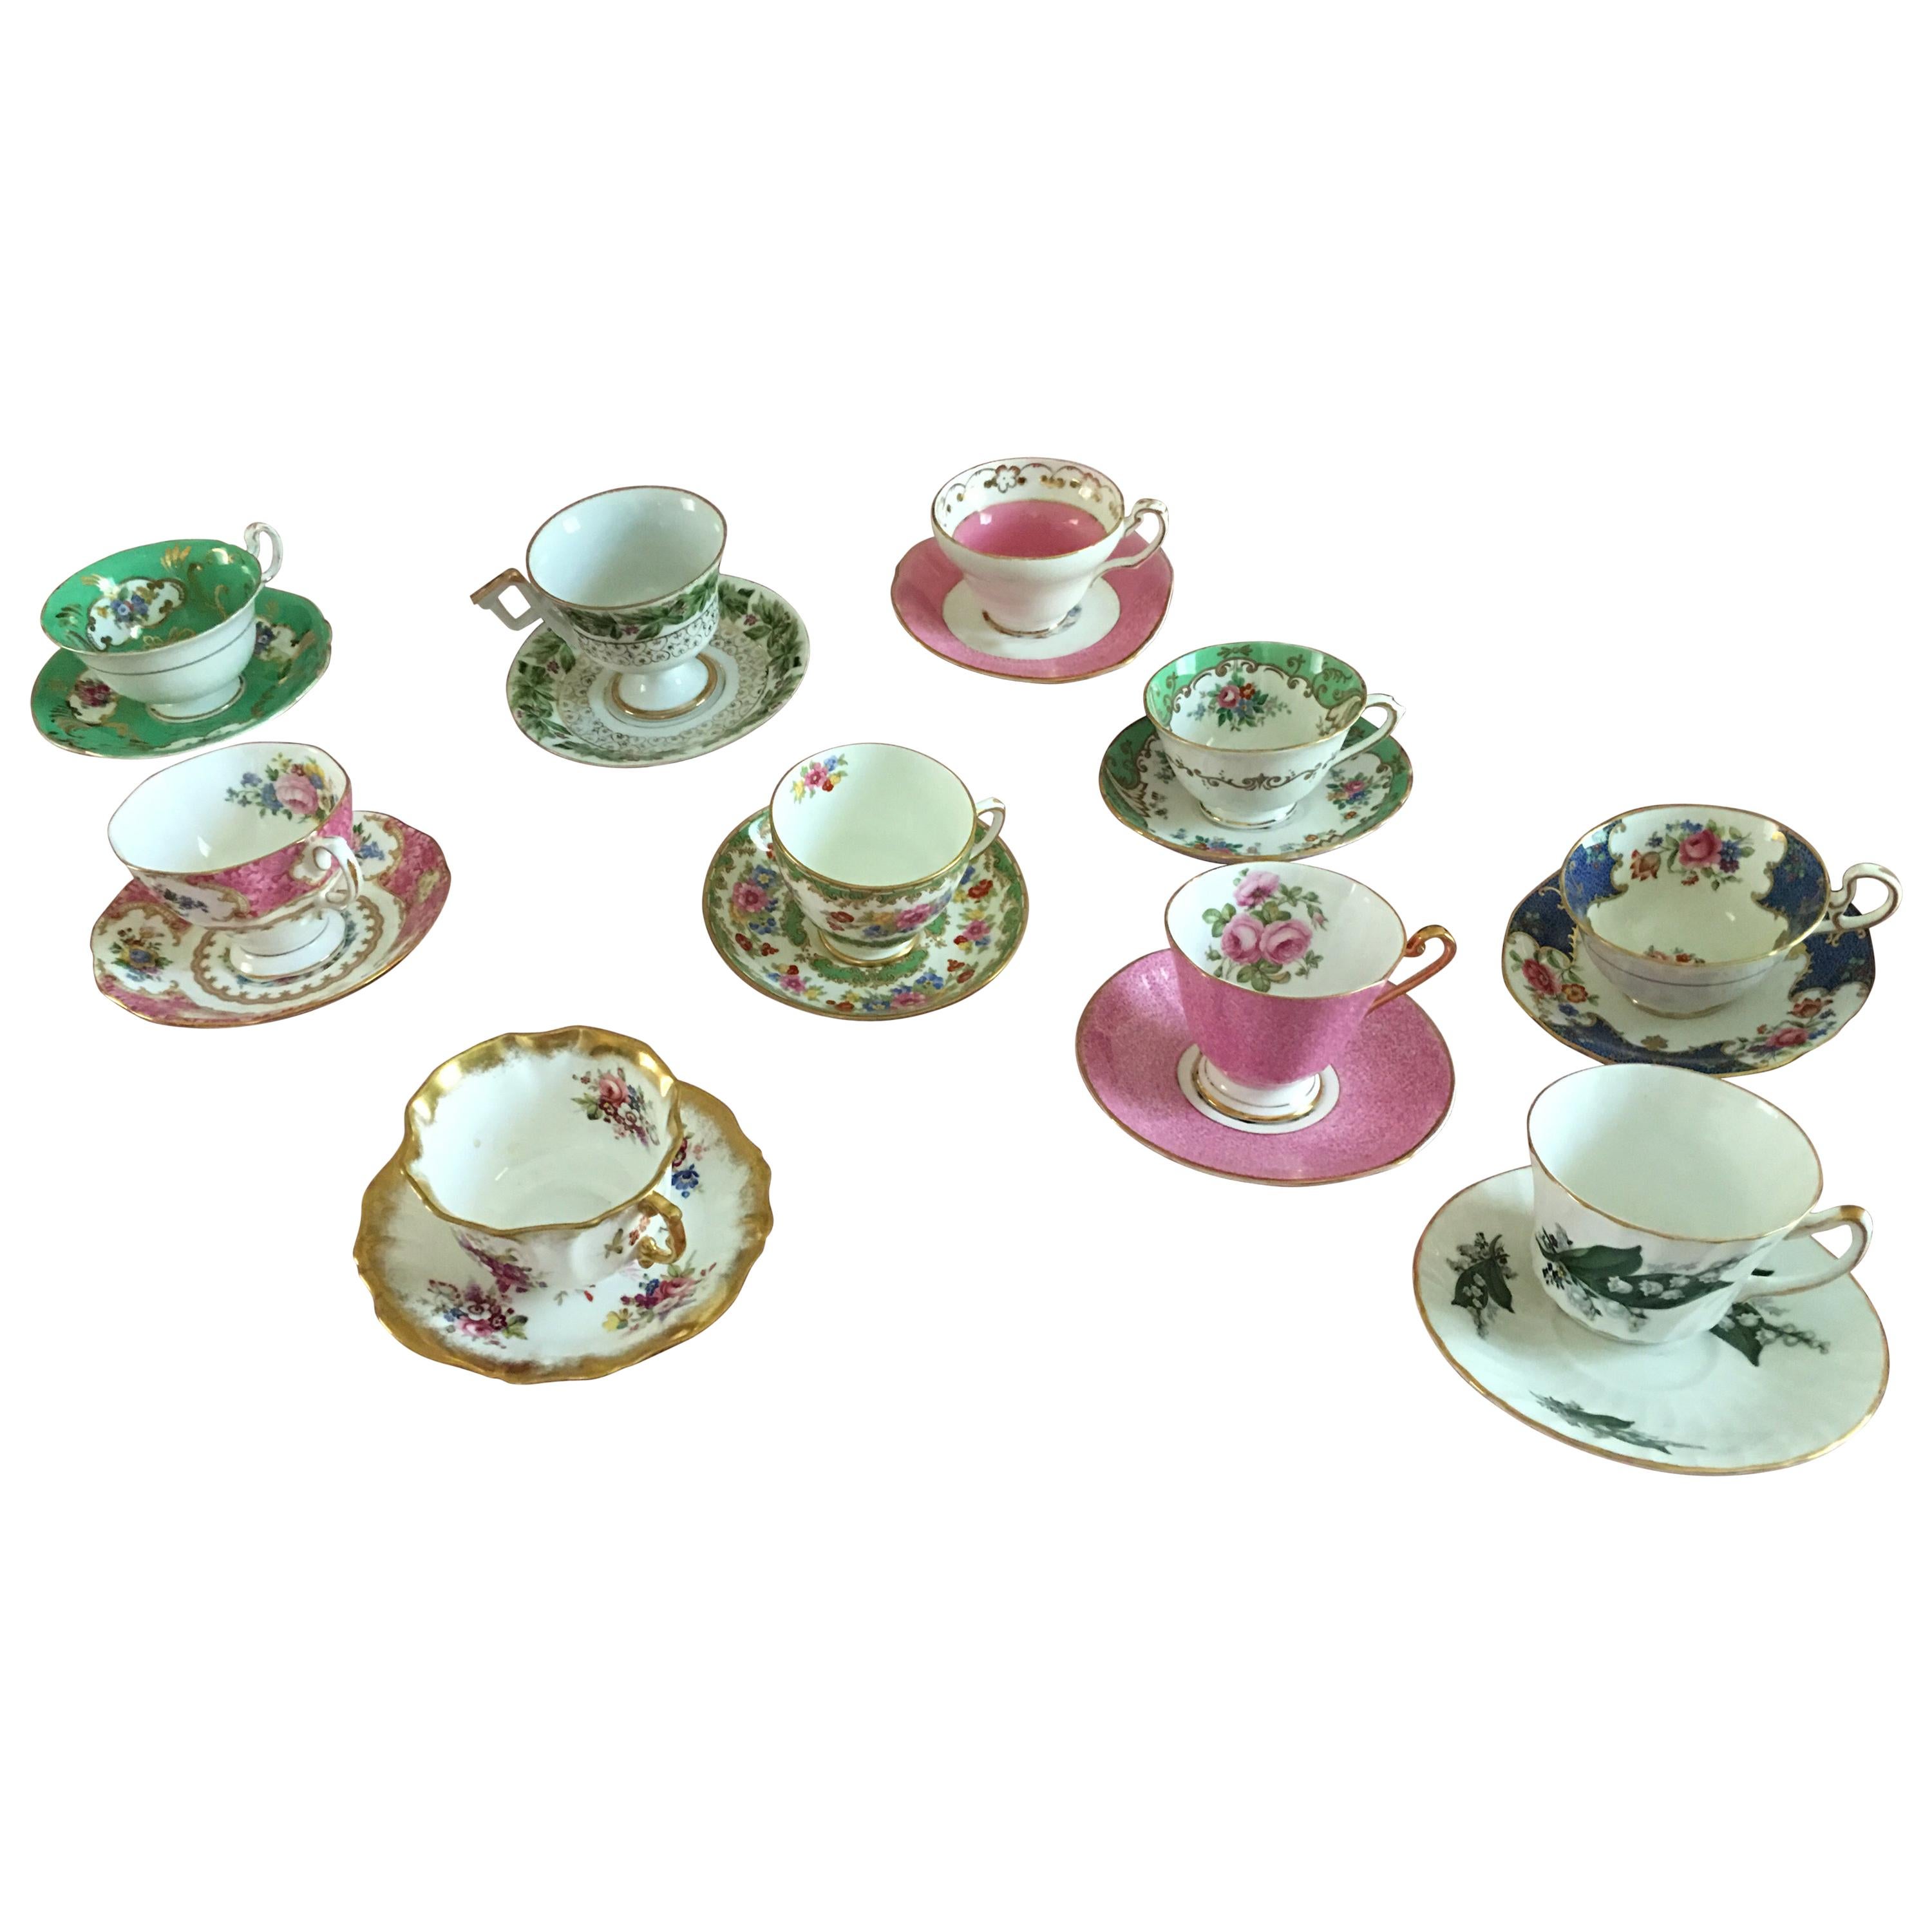 Curated Set of 10 Vintage Floral English Bone China Tea Cups and Saucers